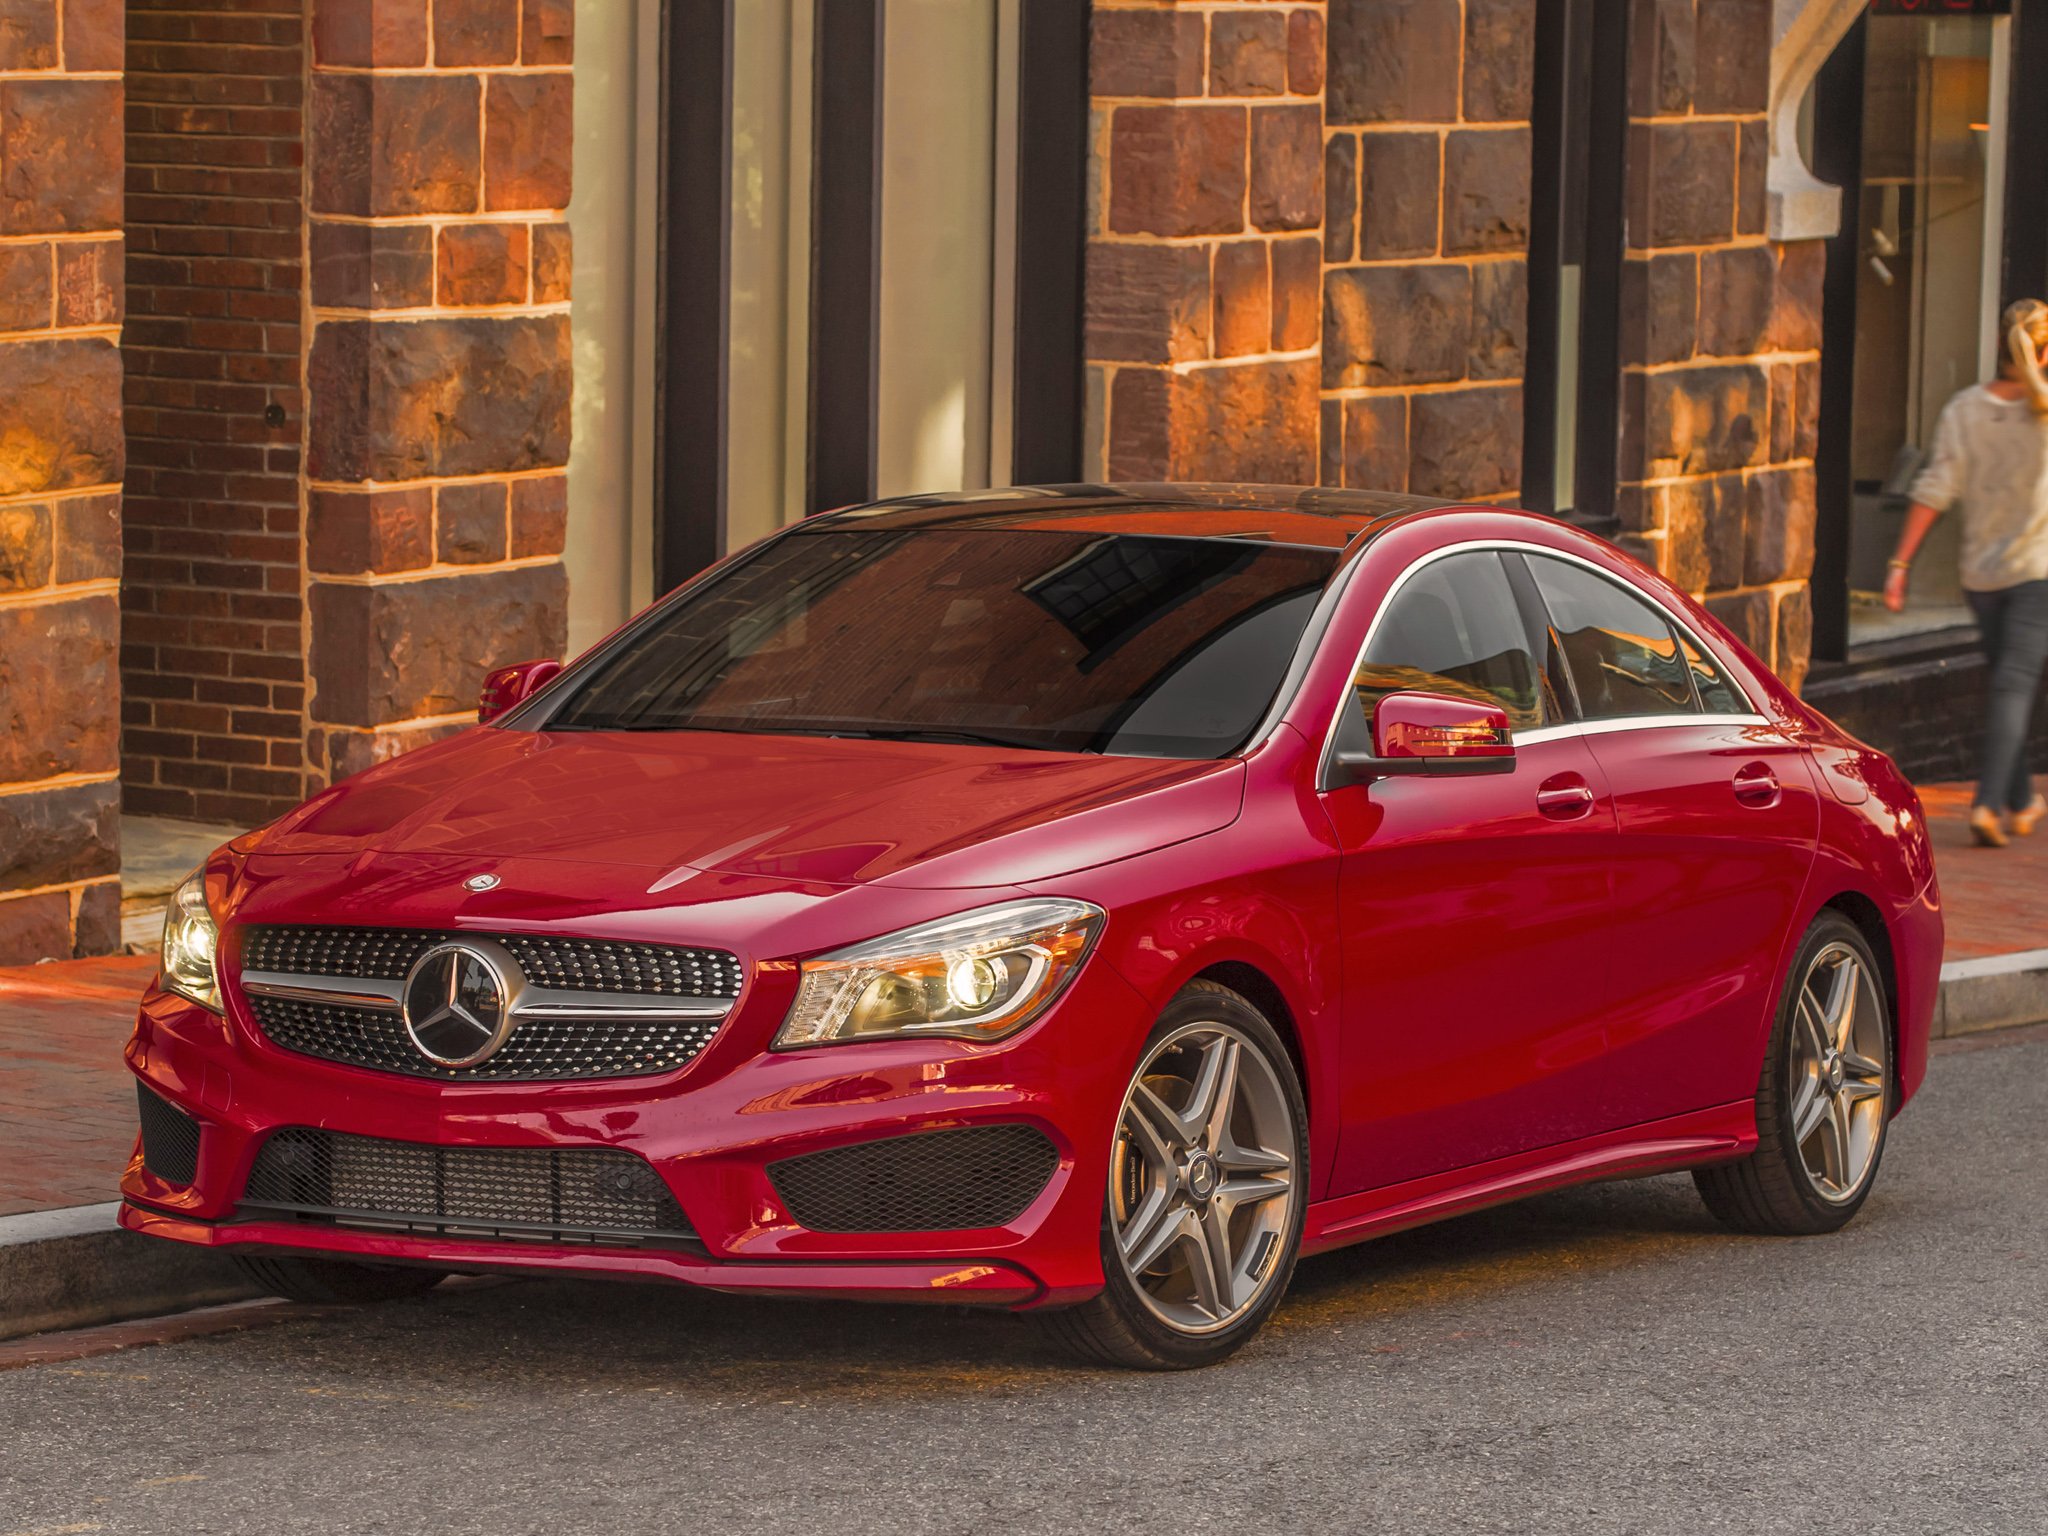 mercedes, Benz, Cla, 250, Amg, Sports, Package, Us spec, C117, Cars, 2013, Red Wallpaper